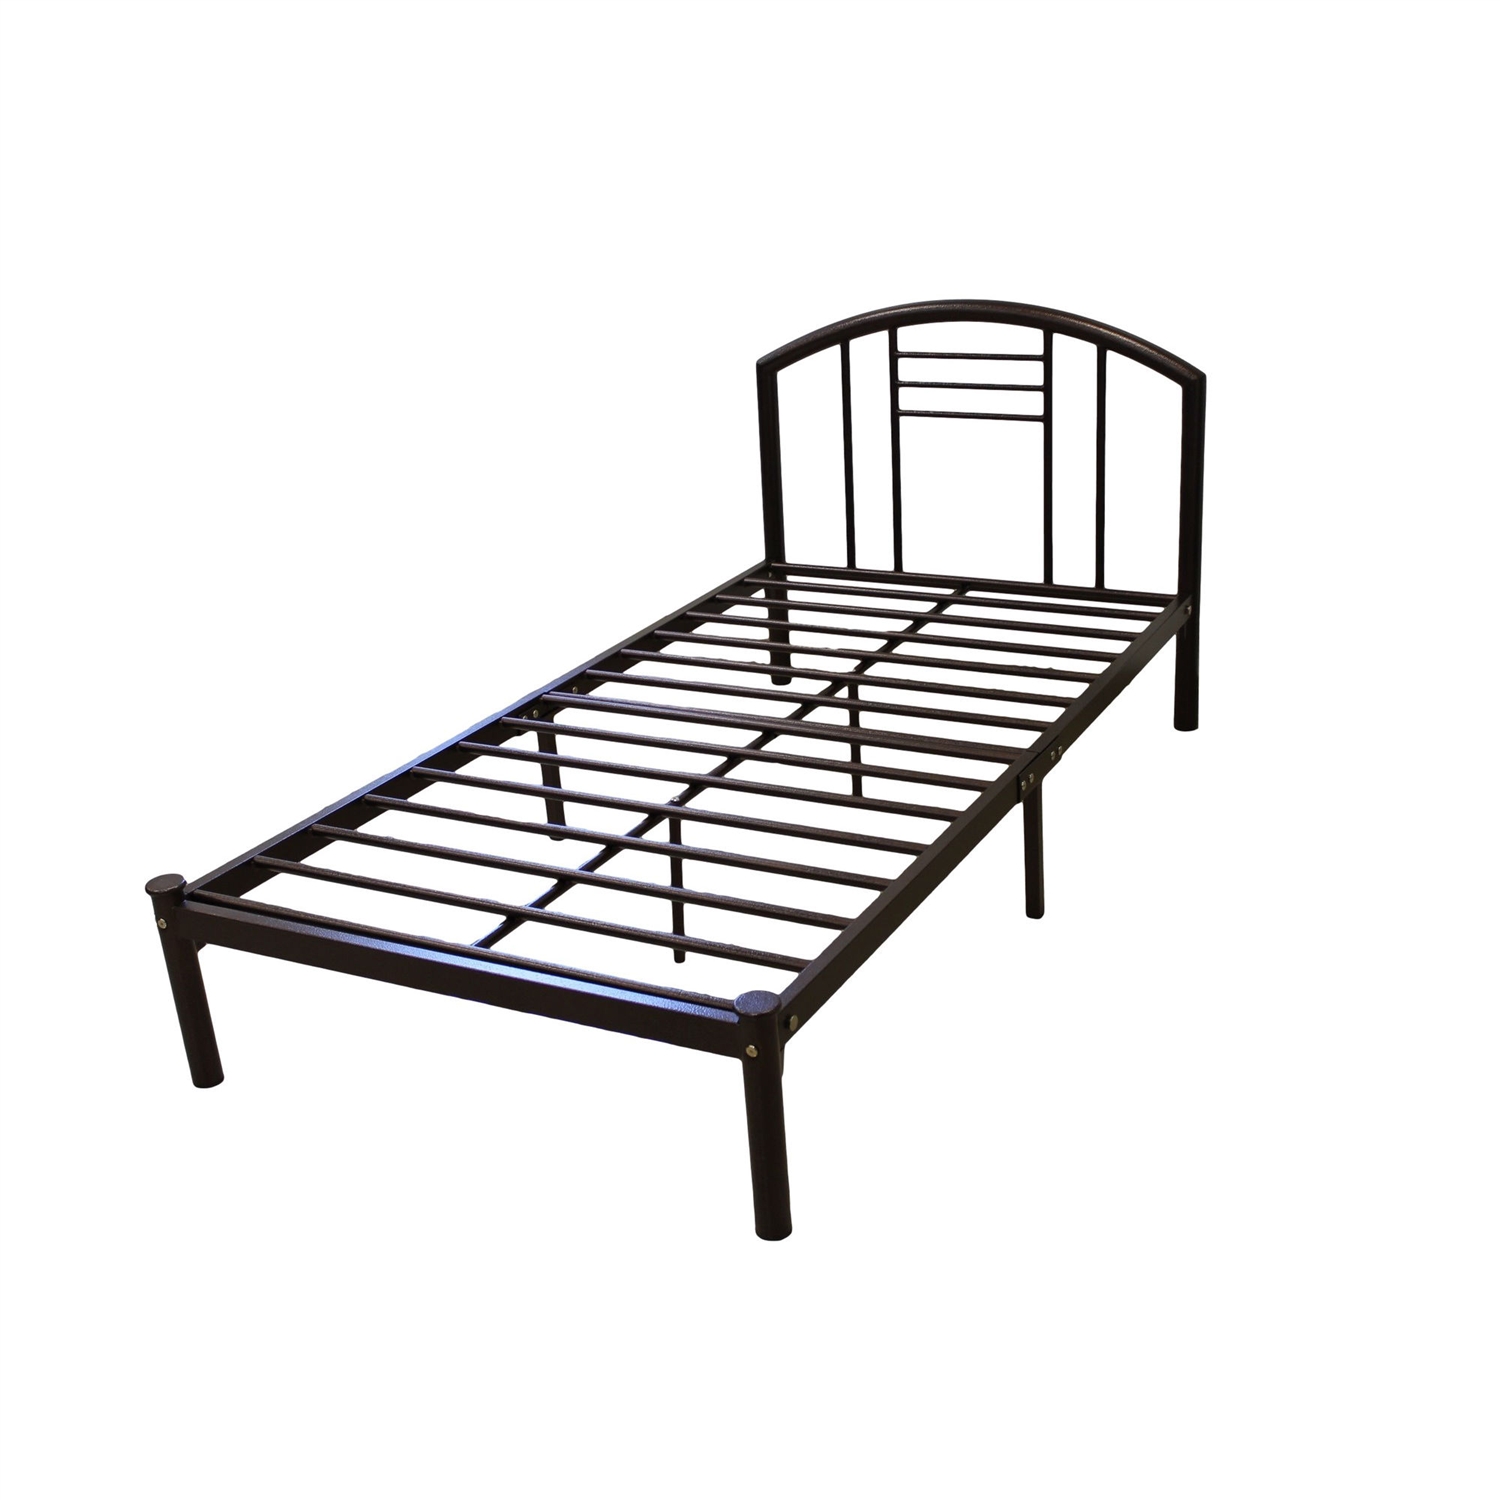 Full size Metal Platform Bed Frame with Headboard in Bronze Finish